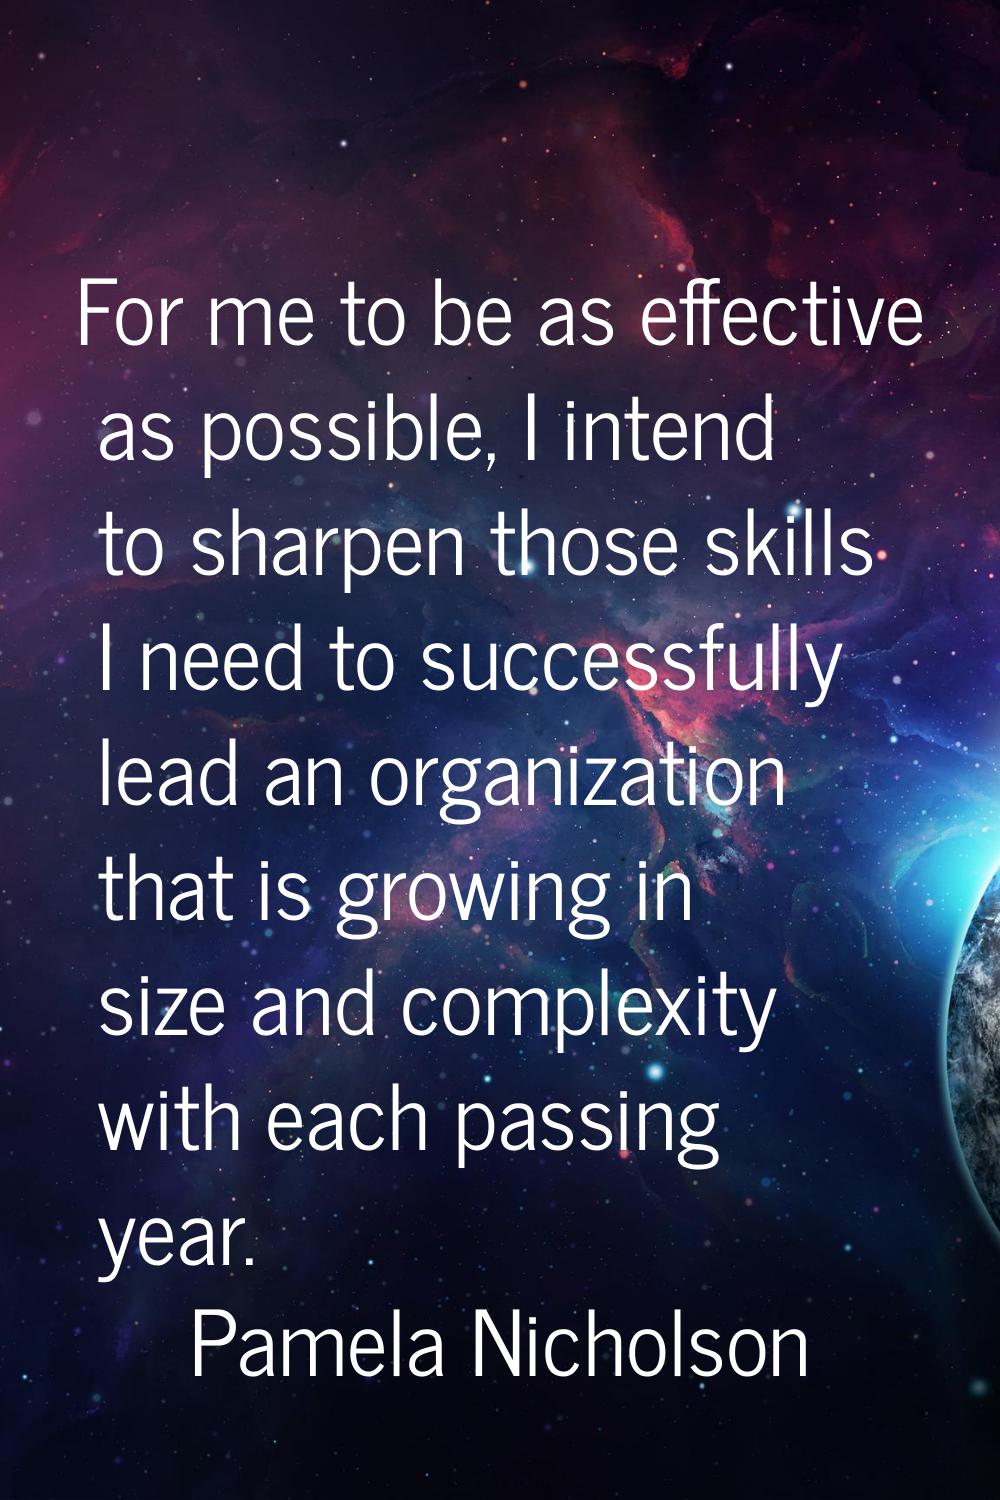 For me to be as effective as possible, I intend to sharpen those skills I need to successfully lead